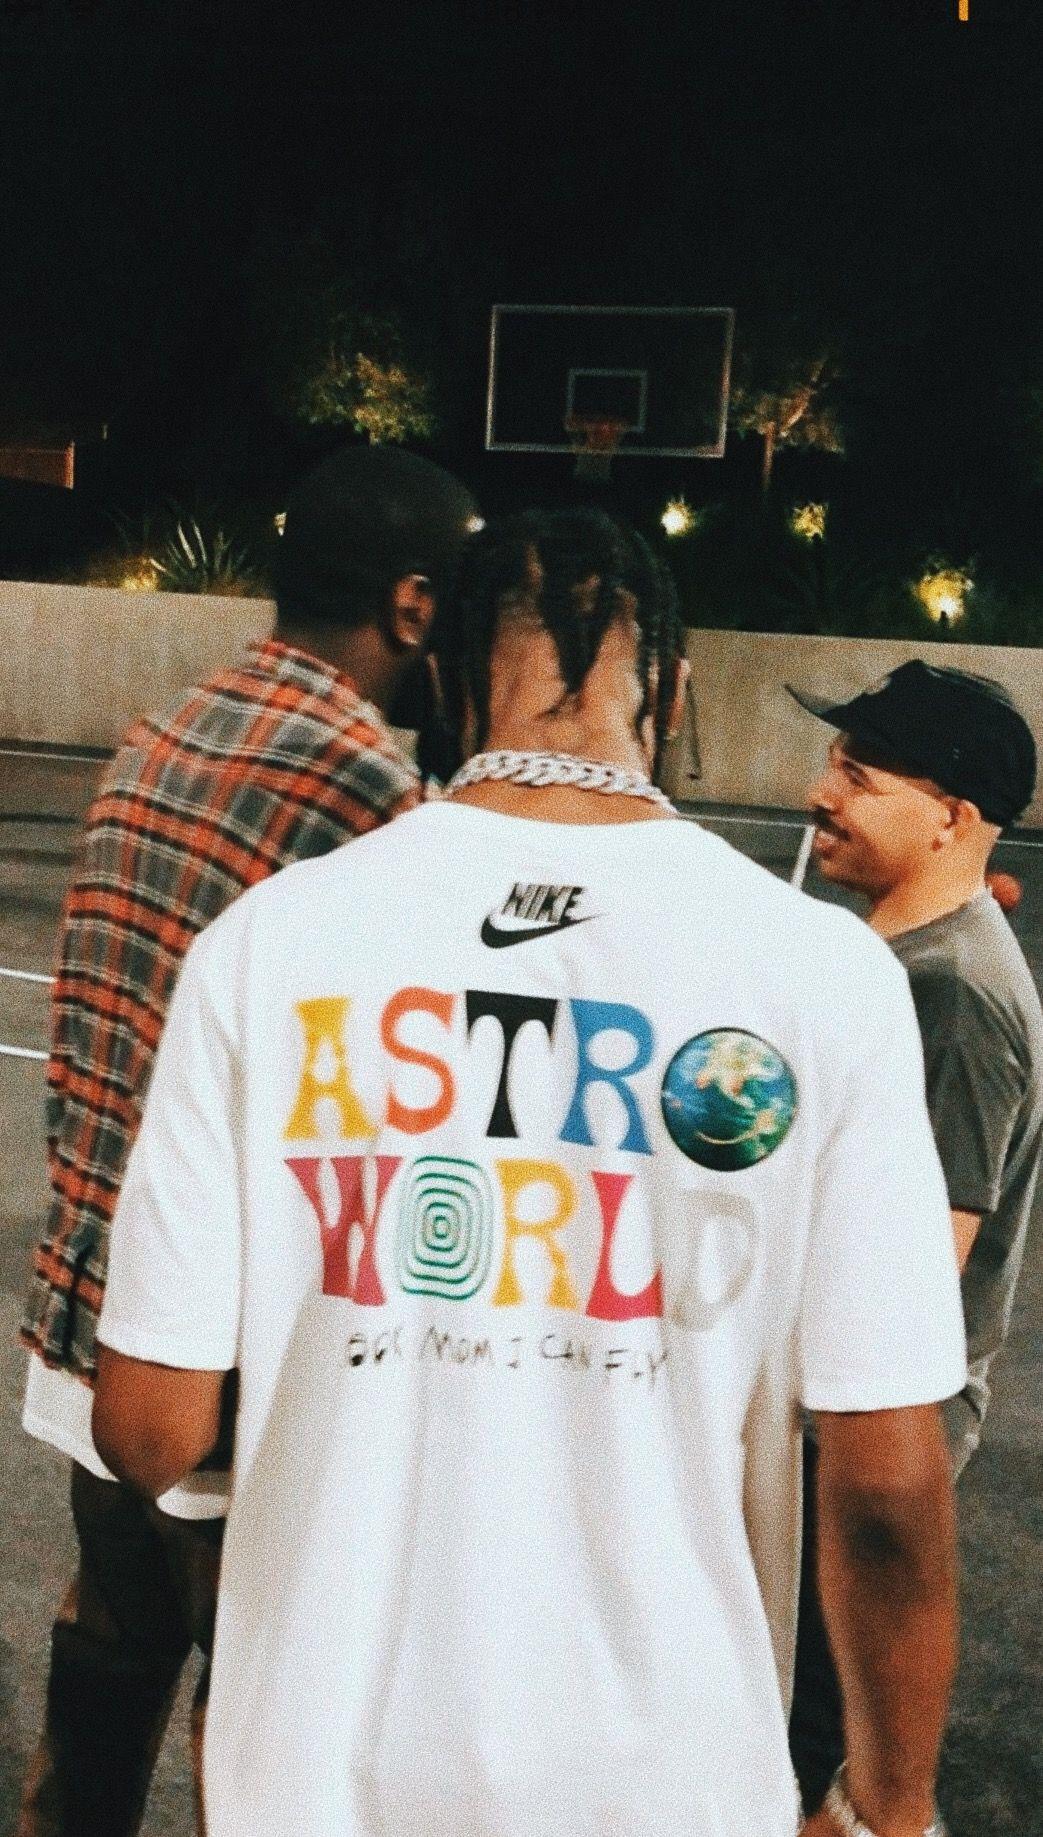 I Love Travis And The Whole Astroworld Aesthetic Sm Scott